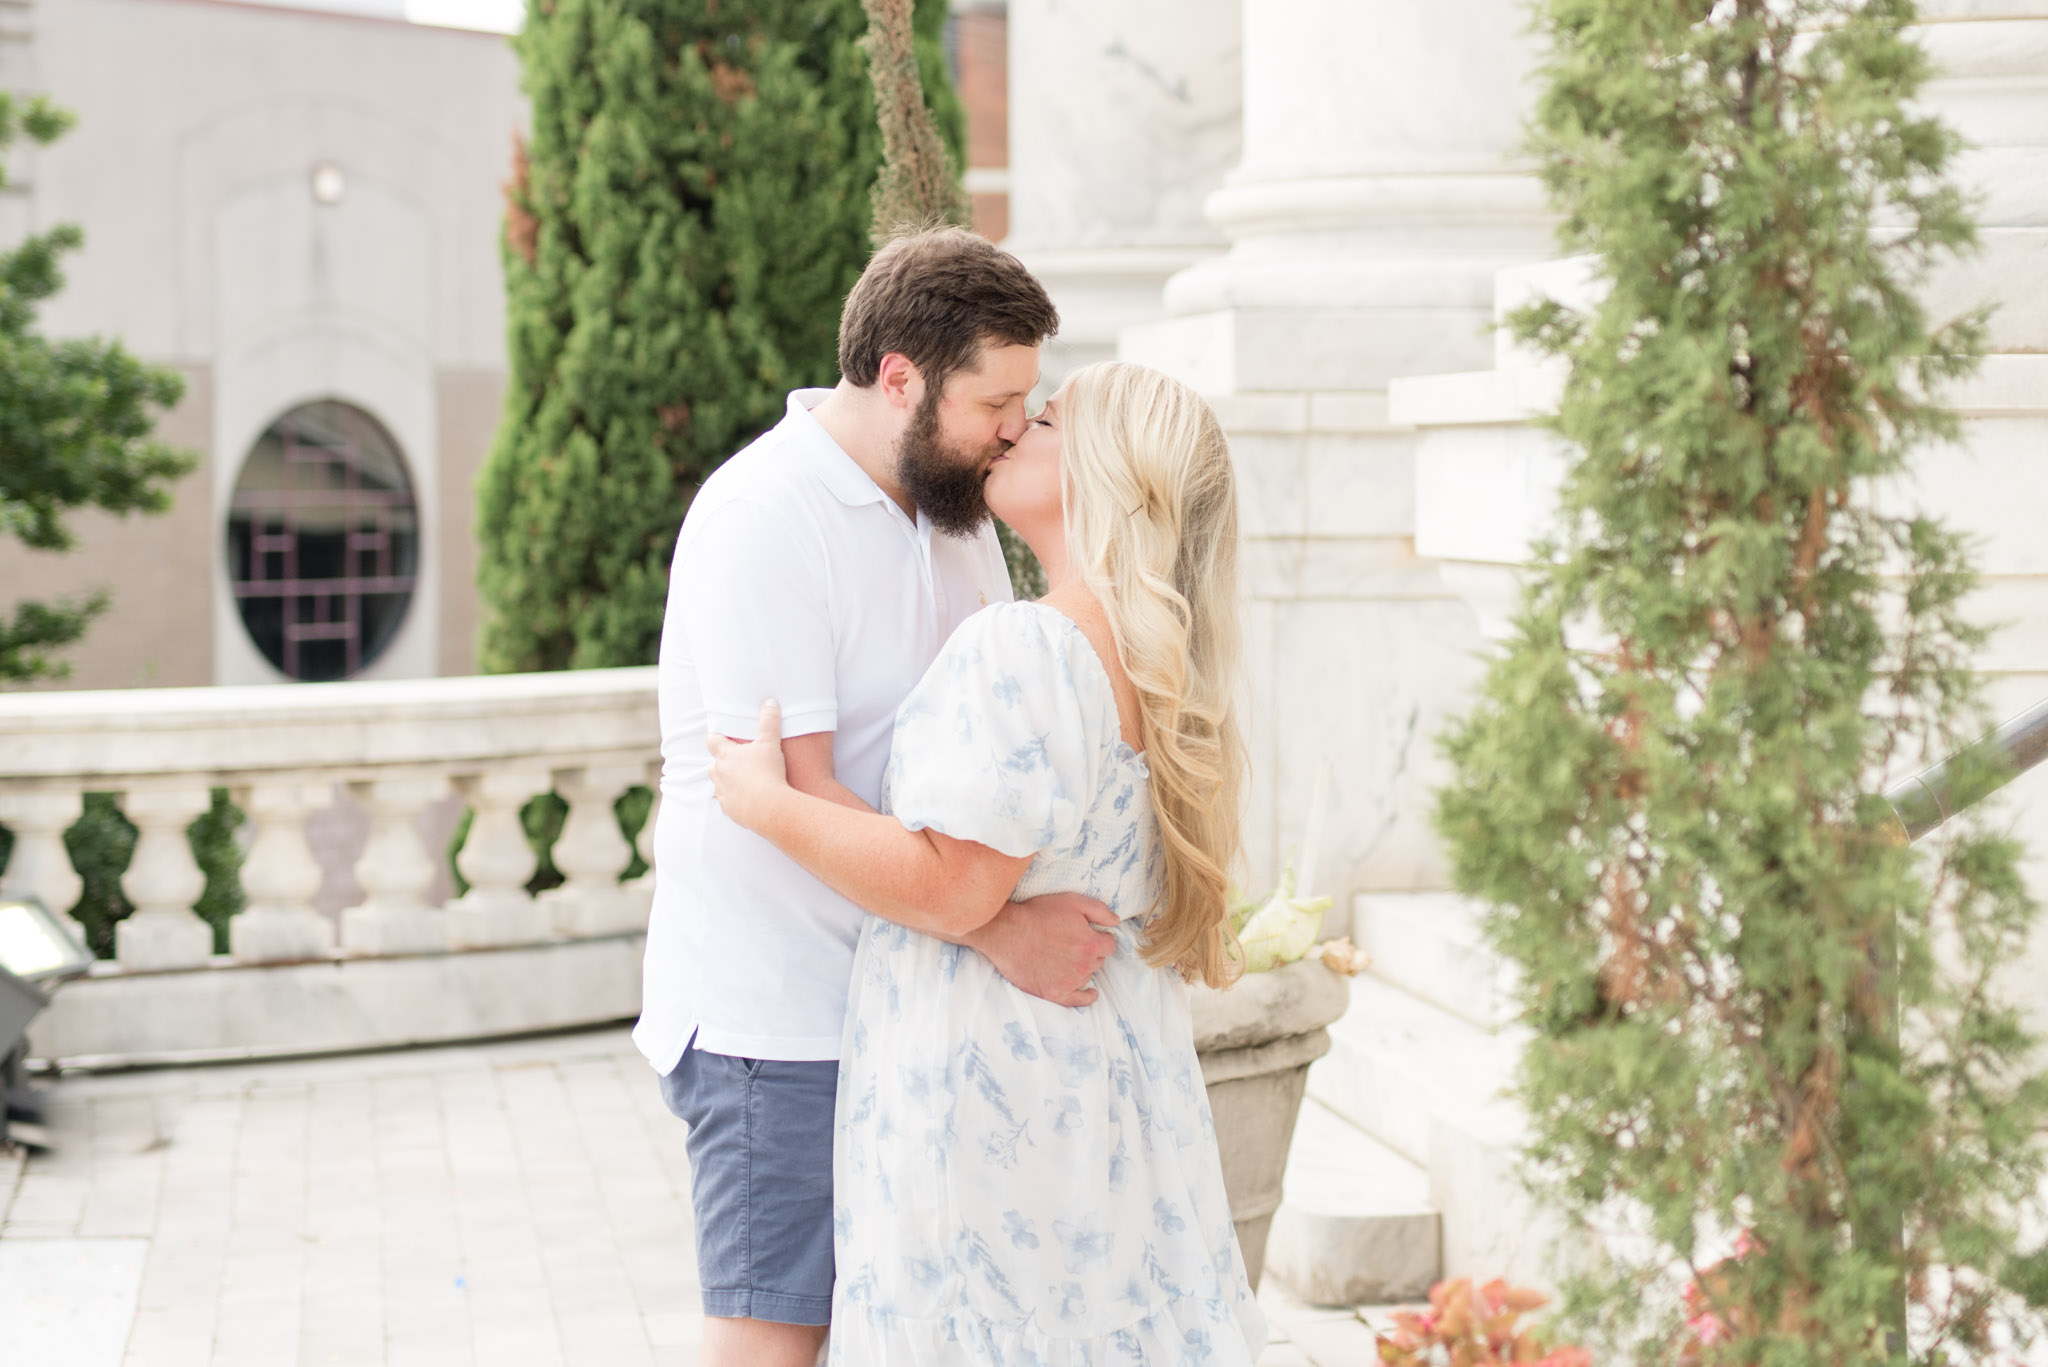 Couple kiss surrounded by white marble columns.